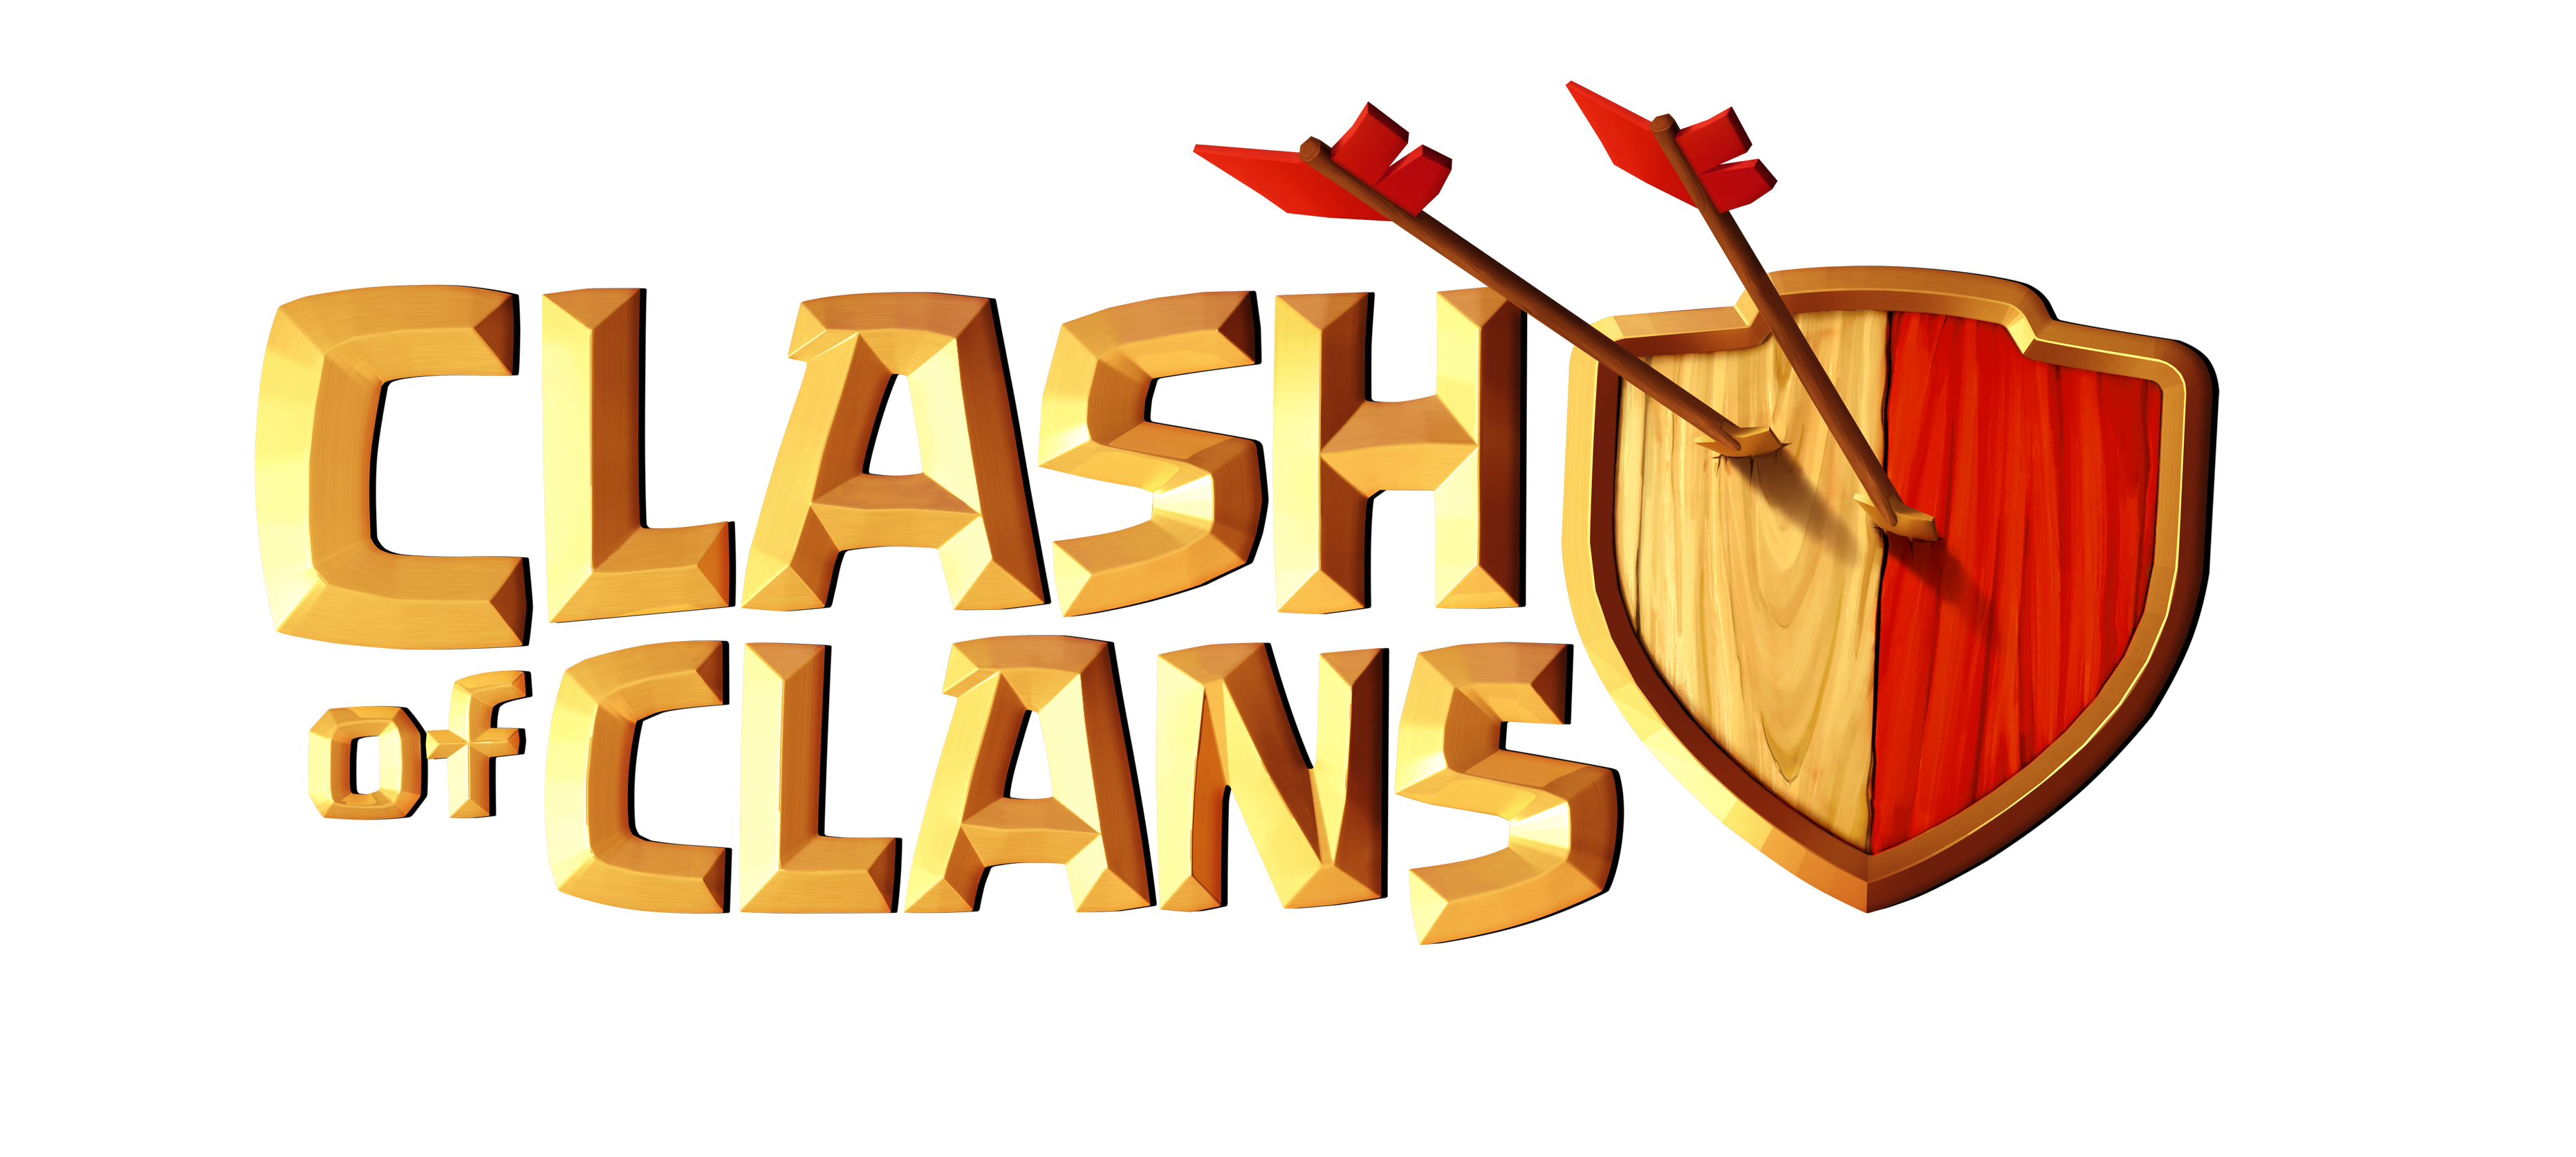 Clash-of-Clans-post.png